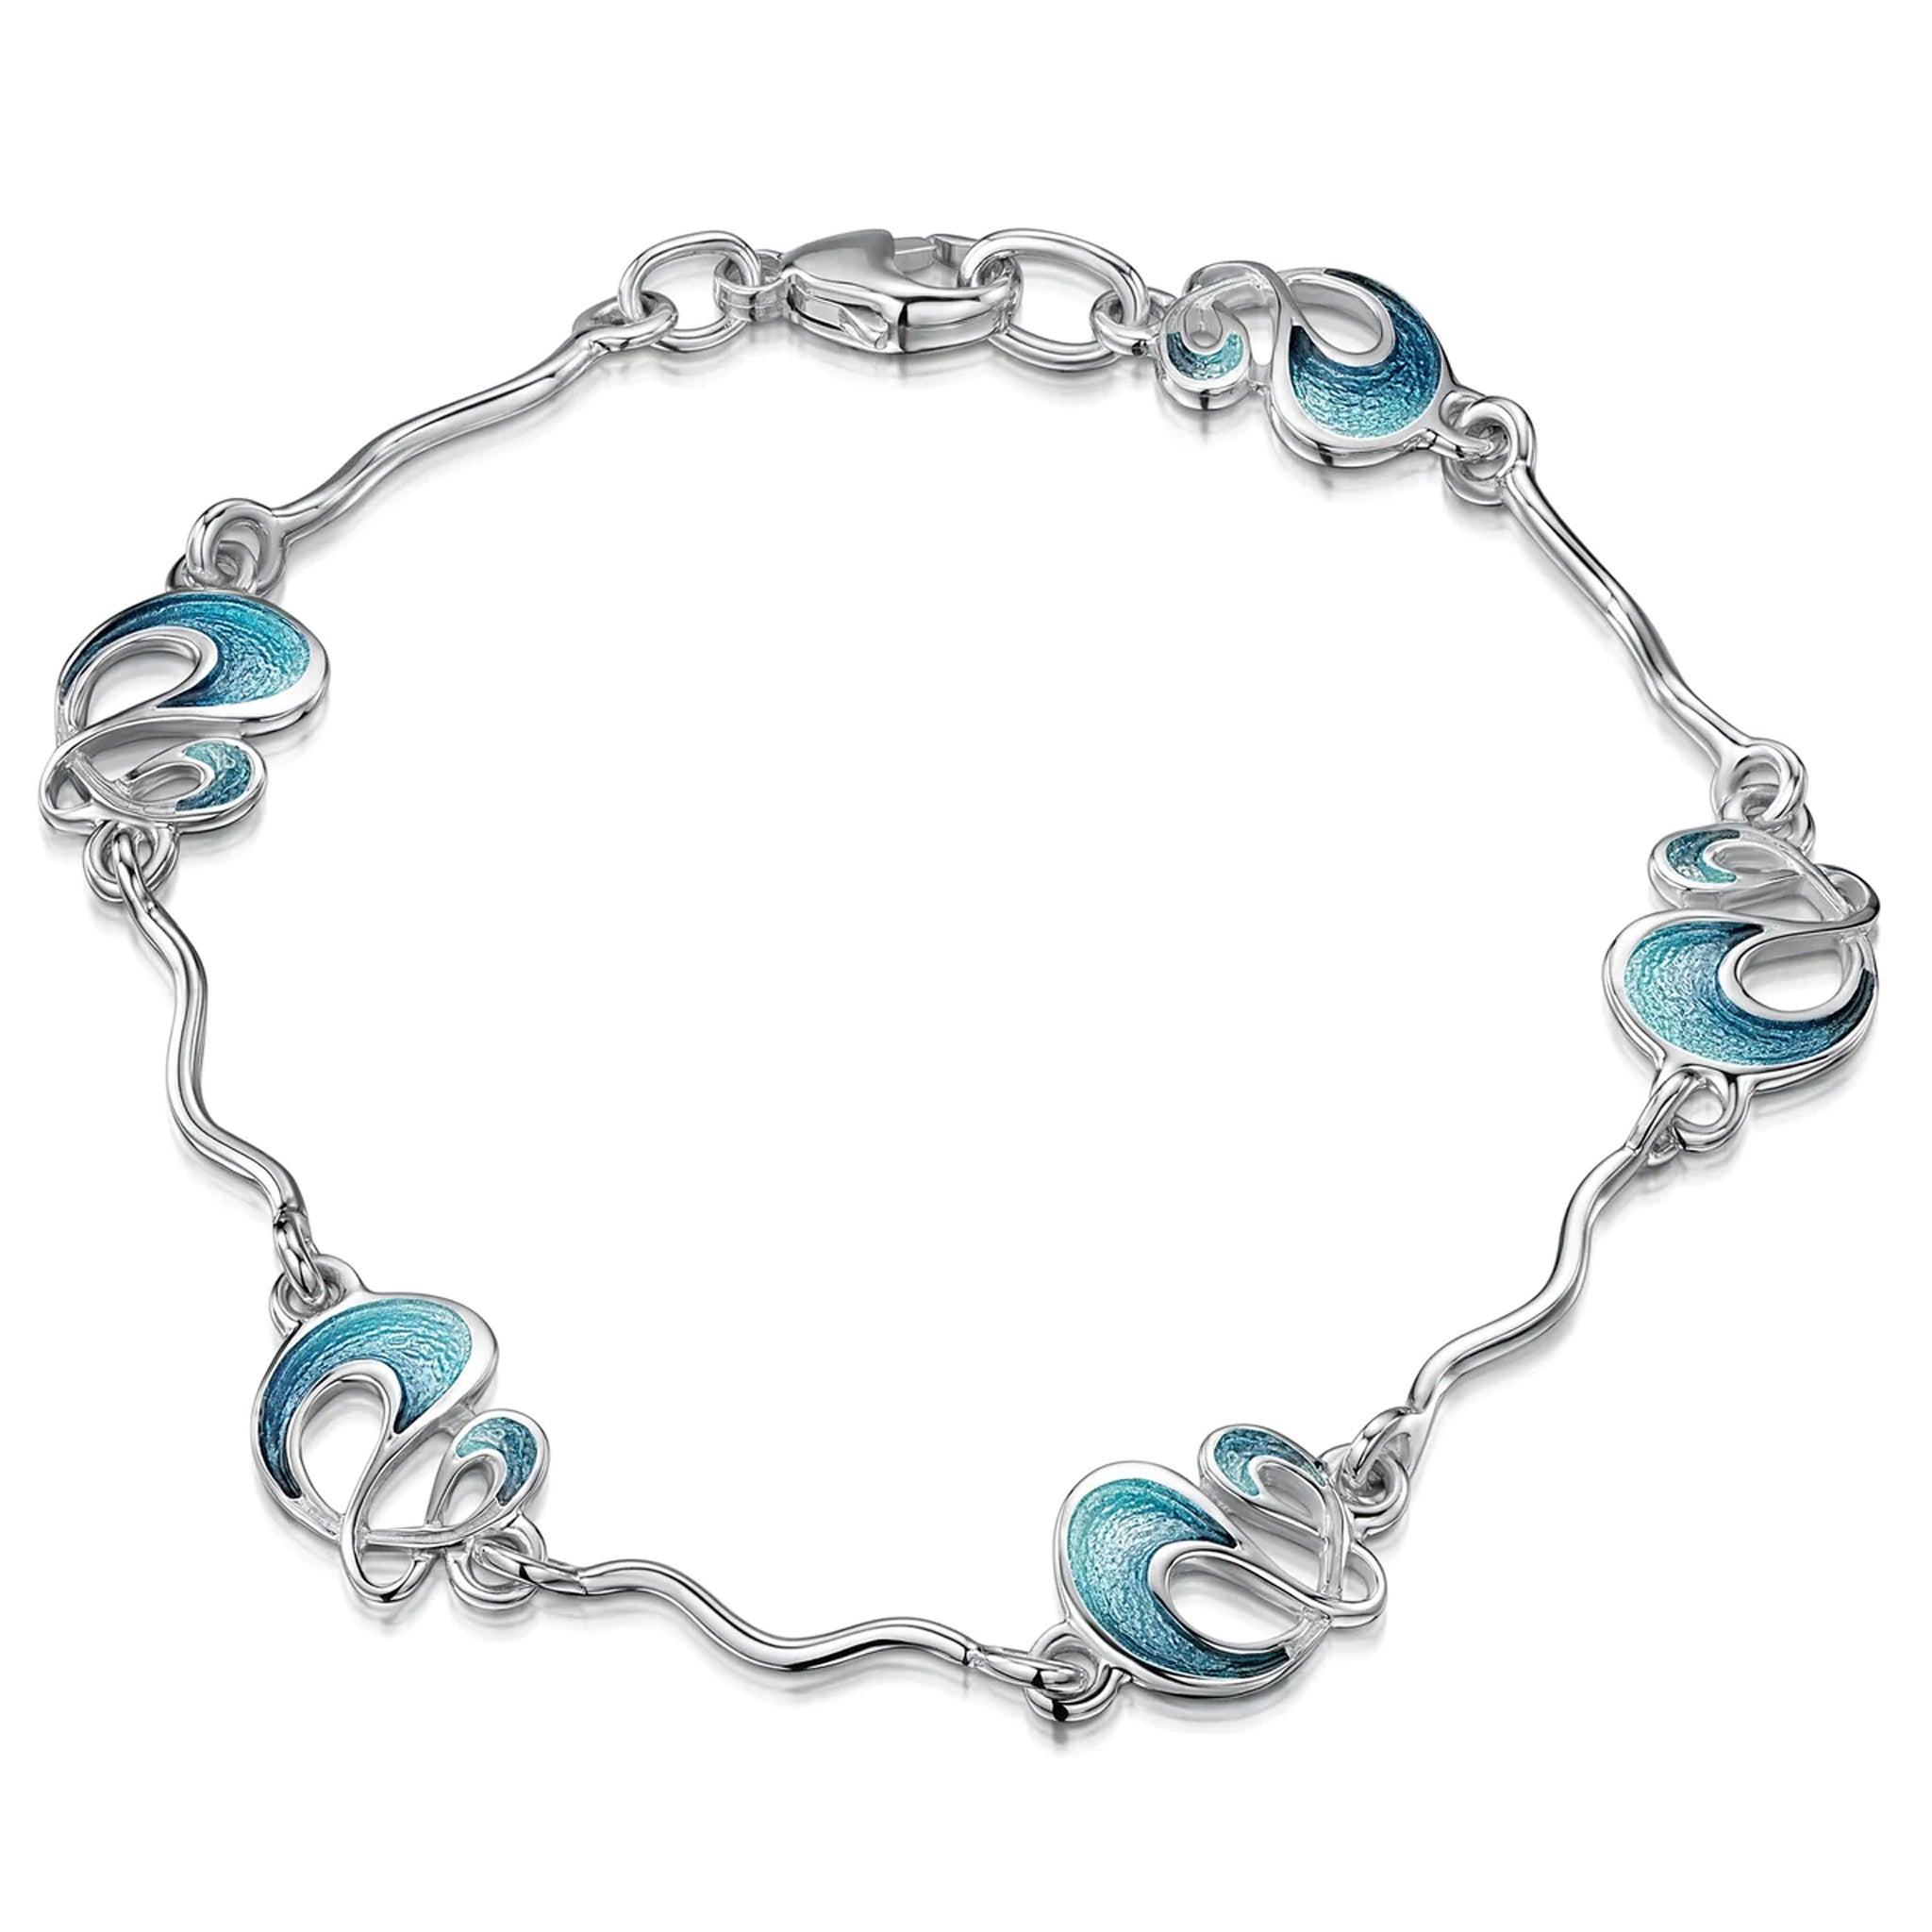 Silver bracelet with silver bars and 5 links in an abstract swirl storm design with blue green enamel